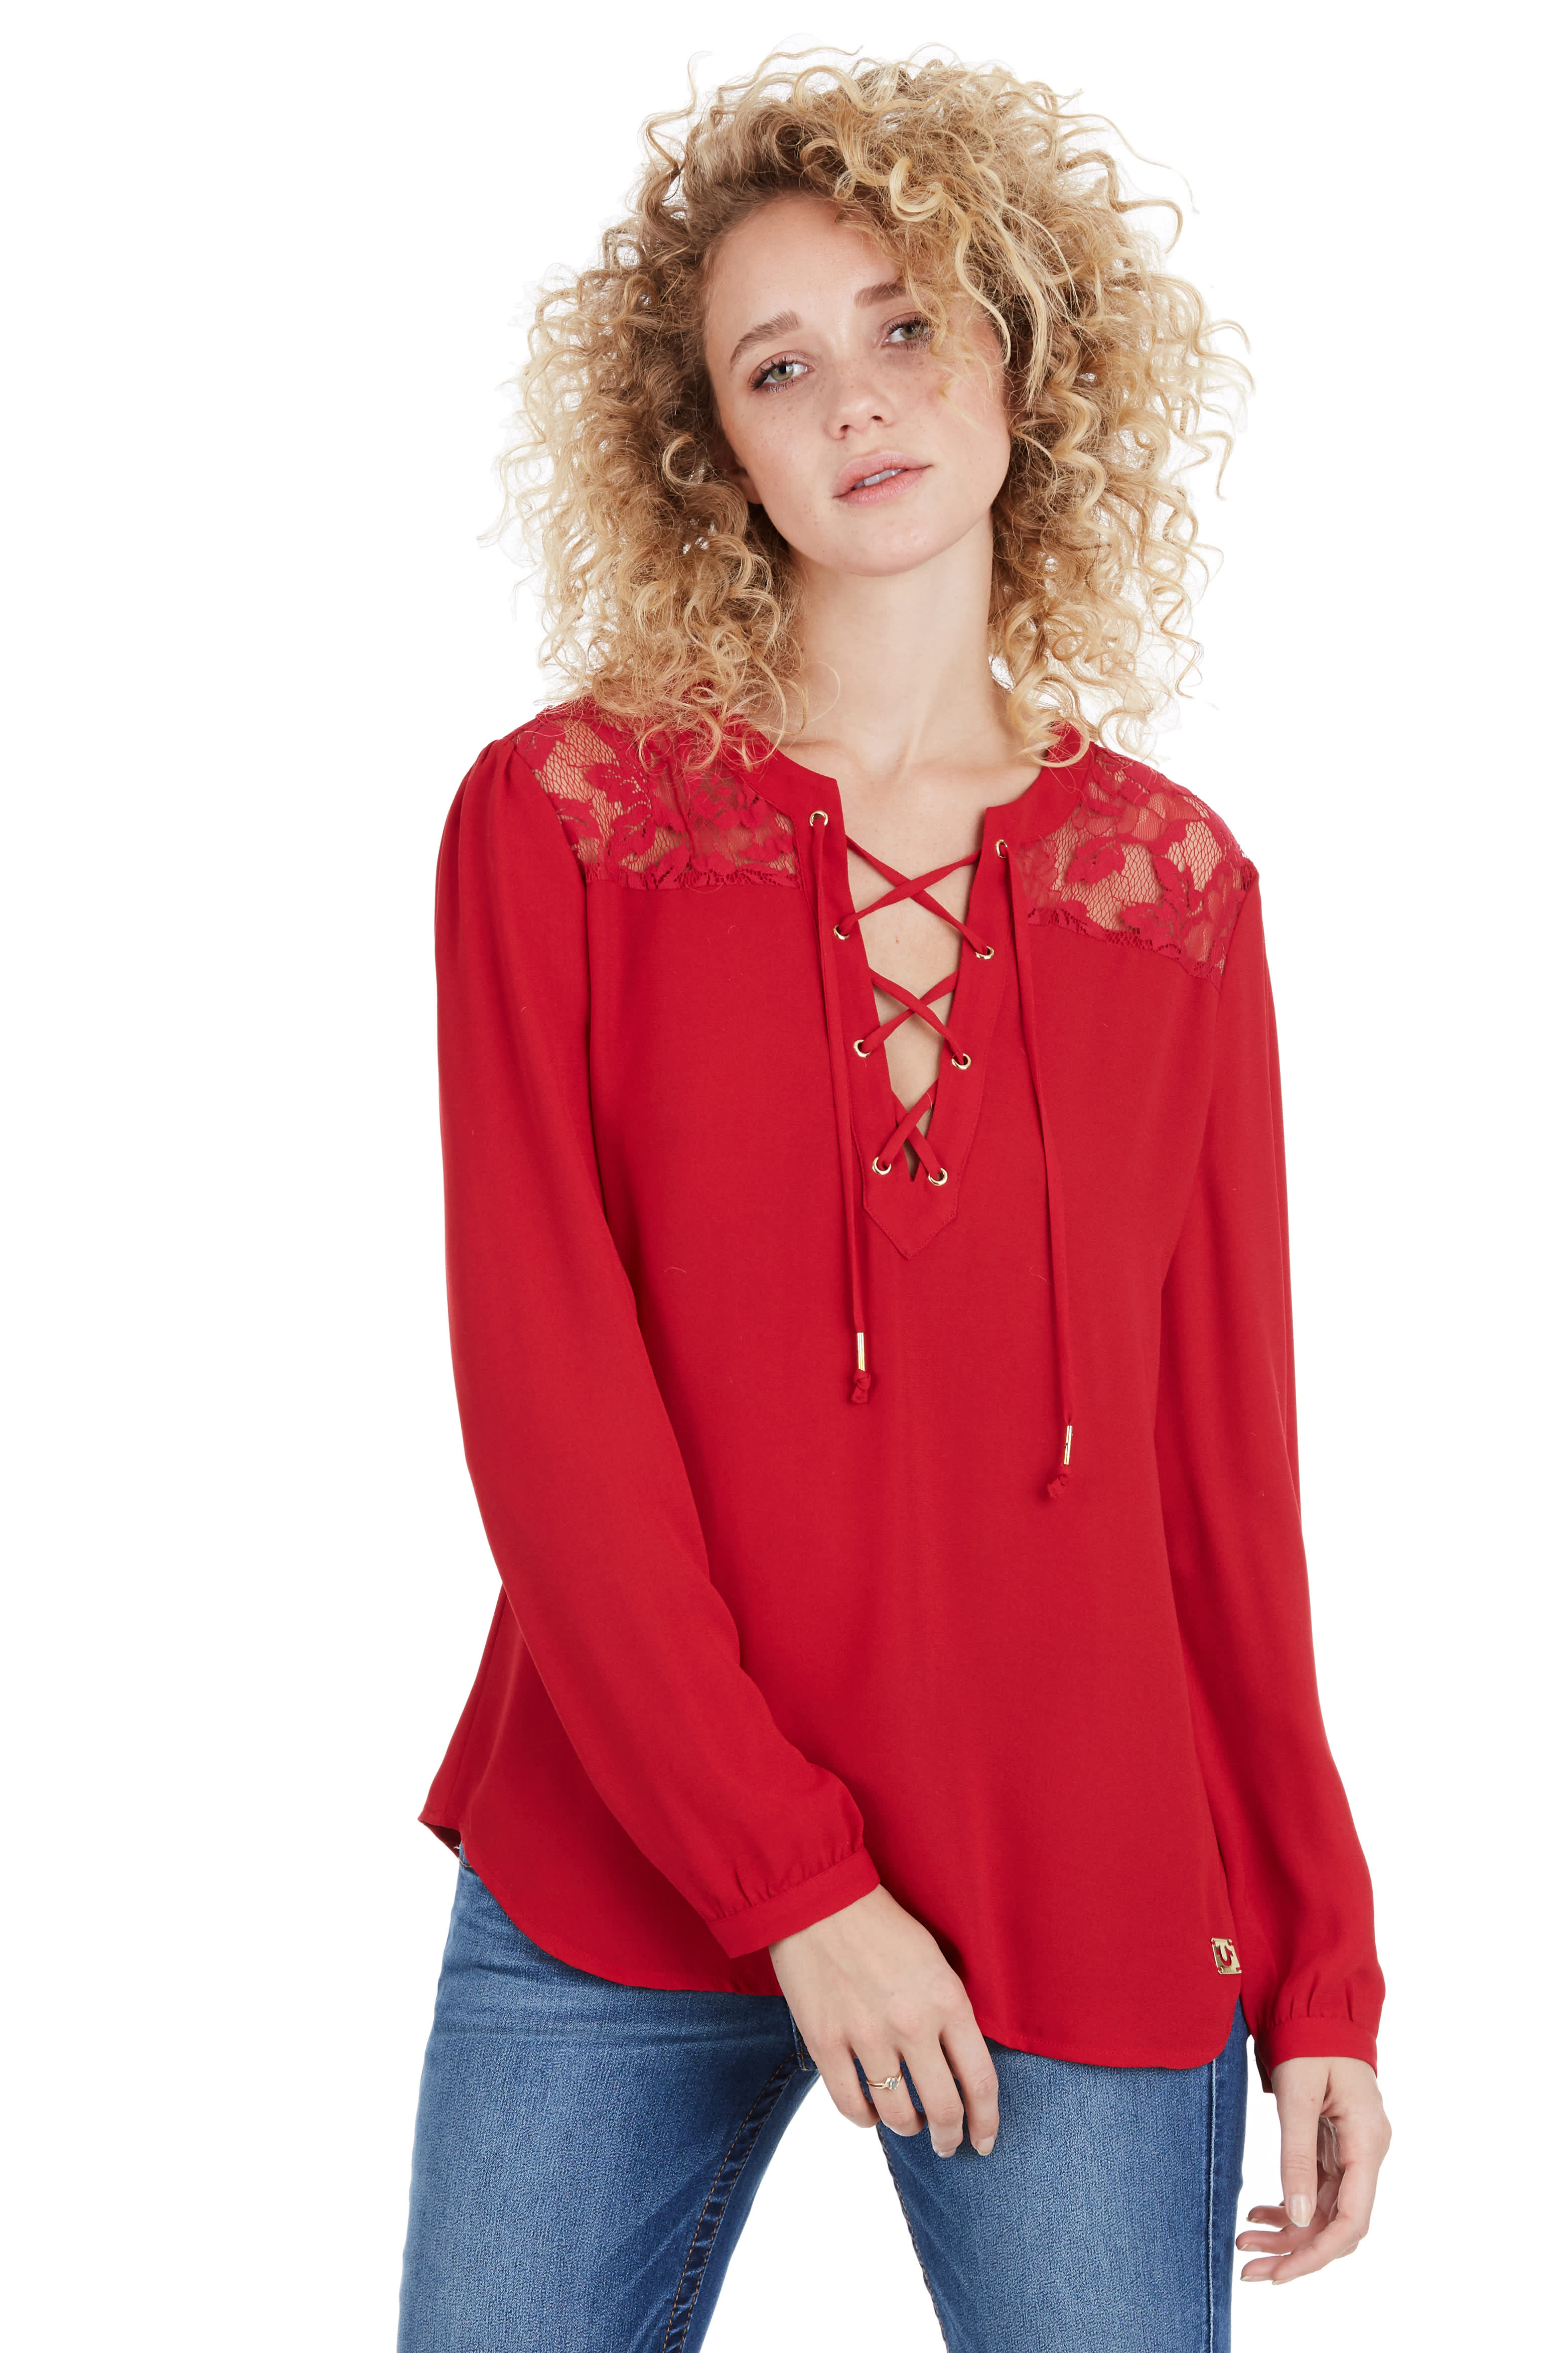 LACE PANEL WOMENS TOP